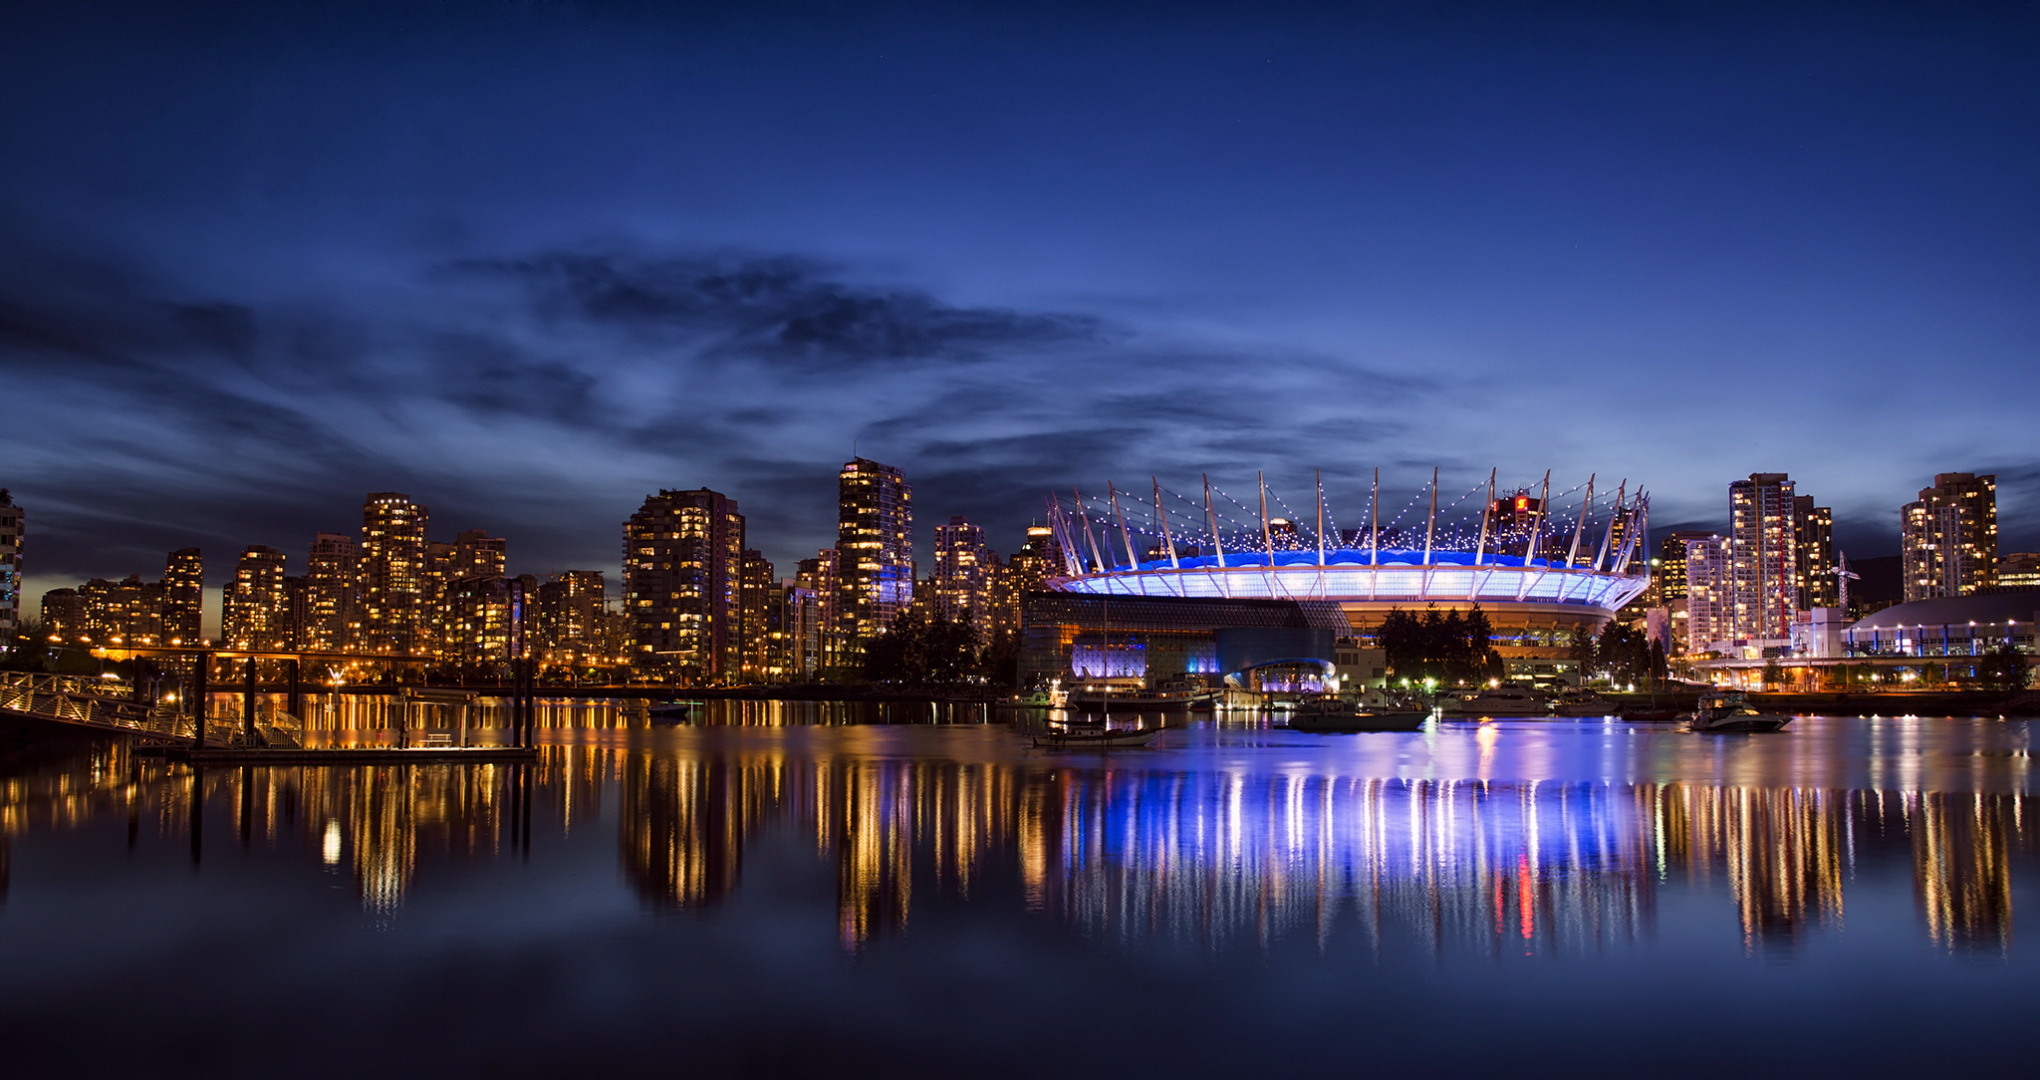 Striking reflection of Vancouver, City lights on water, Captivating urban scenery, Breathtaking views, 2040x1080 HD Desktop